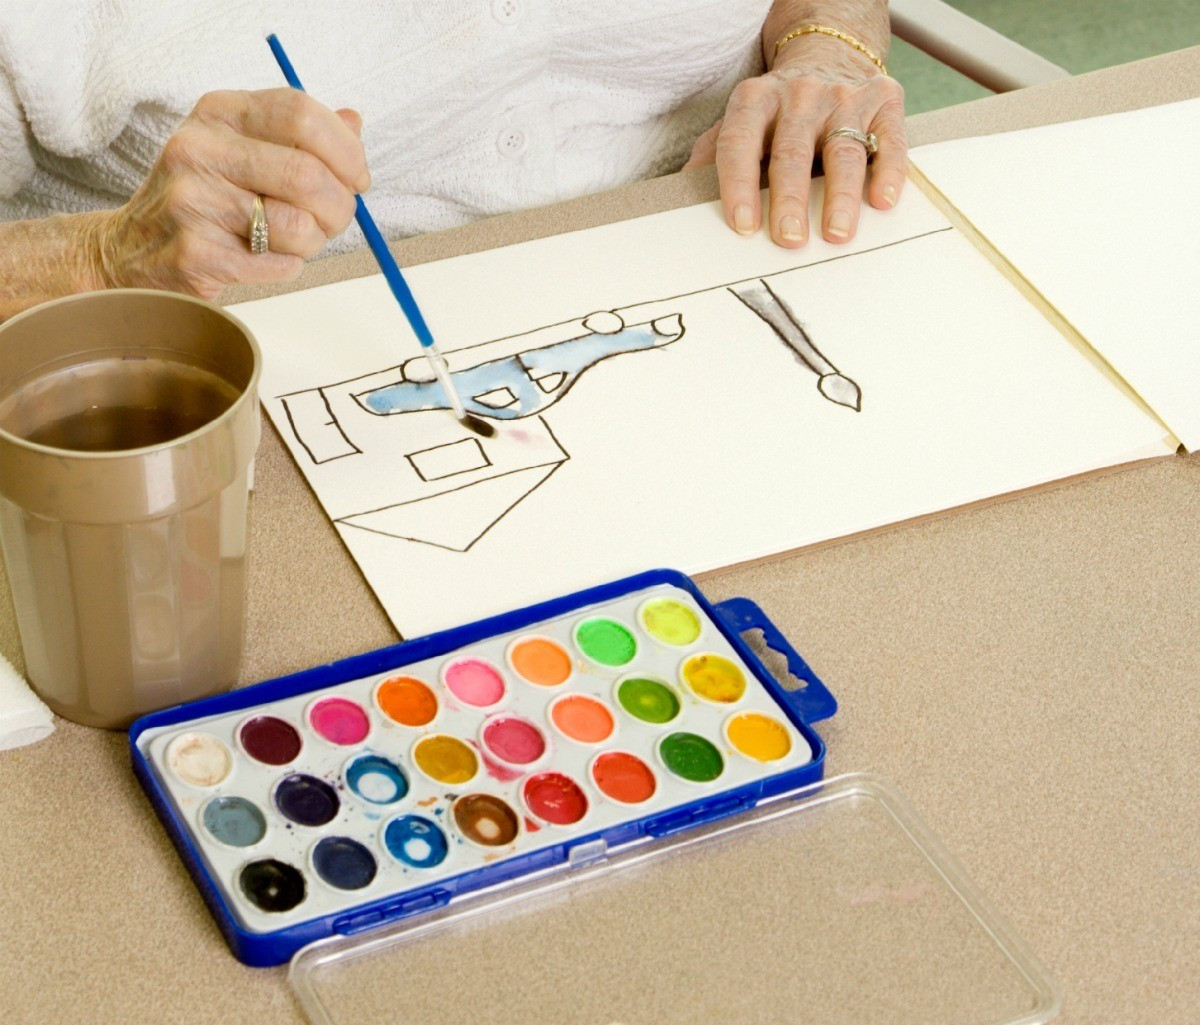 Painting Crafts For Adults
 Crafts for Mentally Challenged Adults